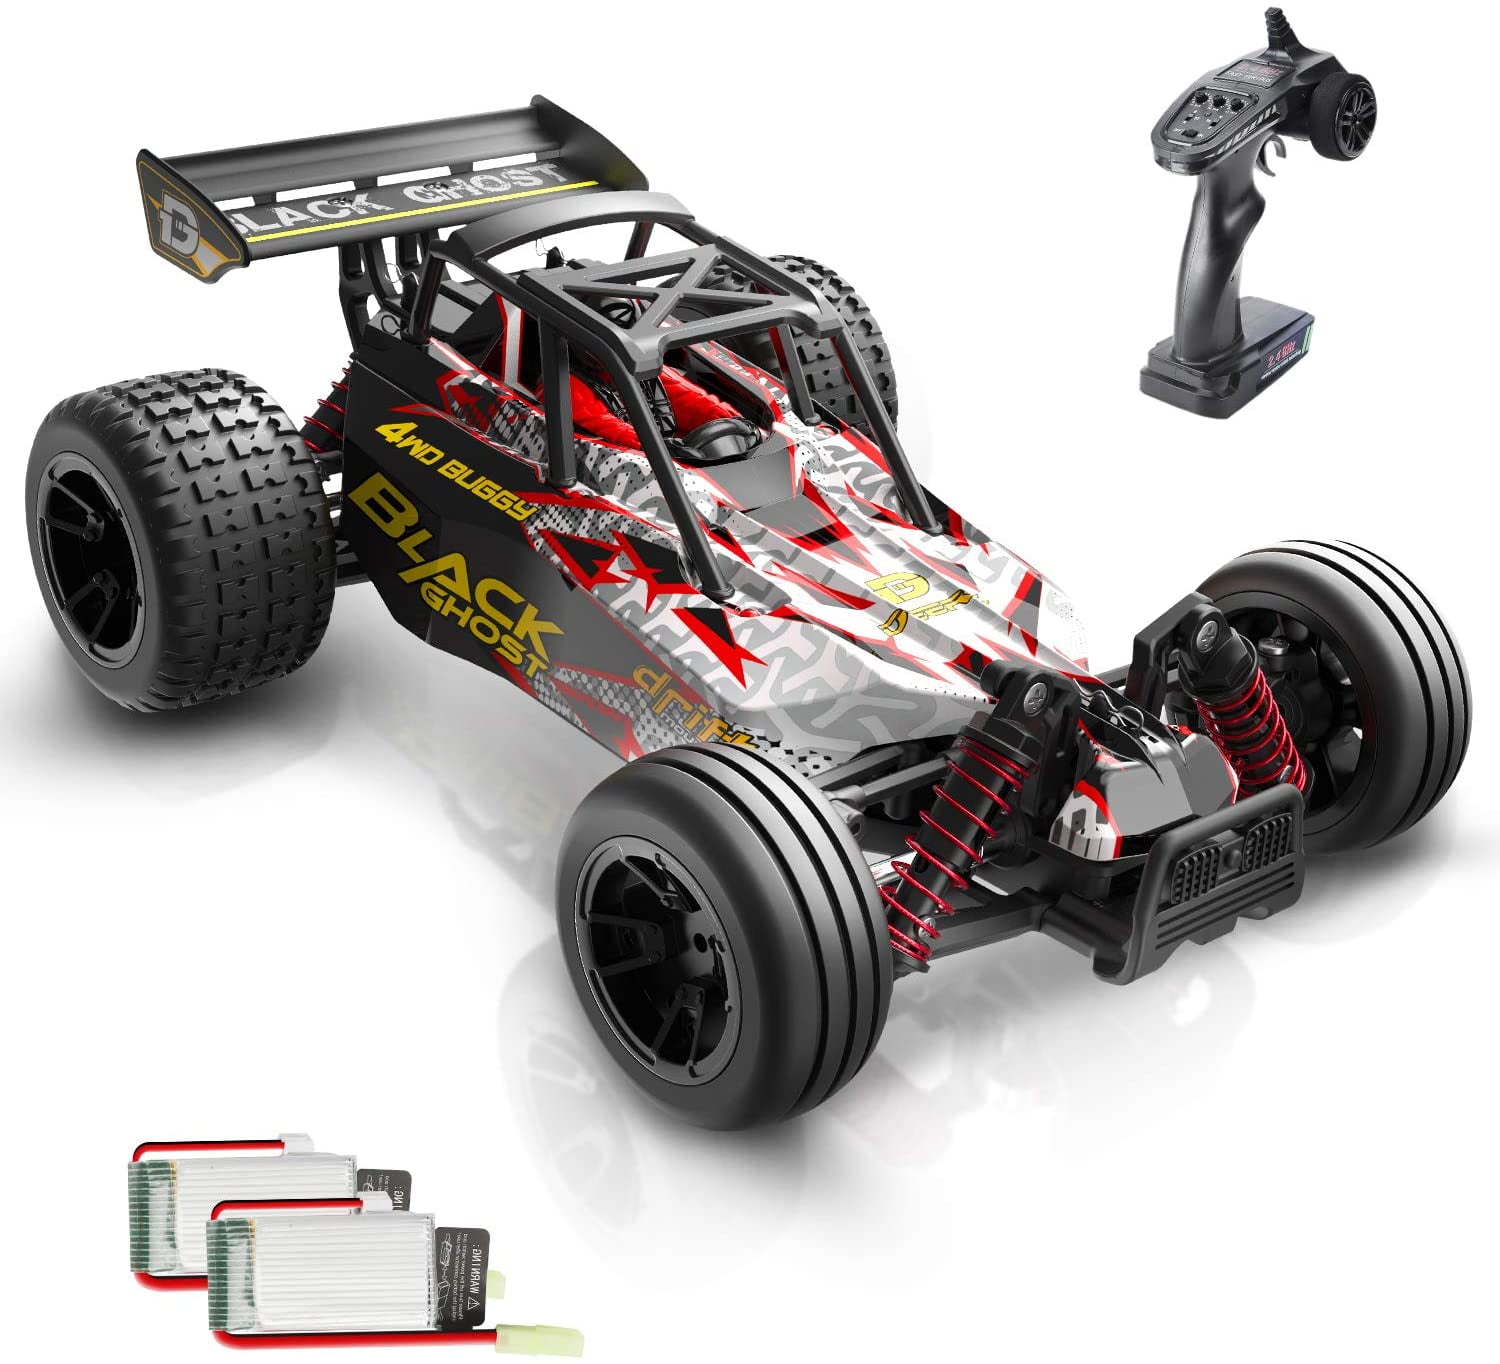 RC Car 1:18 Scale High Speed Remote Control Car 2.4GHz Radio 25 with Two Rechargeable Batteries for 40 Min Play MPH 4WD All Terrain Off Road Rally Buggy Racing Cars Toys Gifts for Boys & Adults 